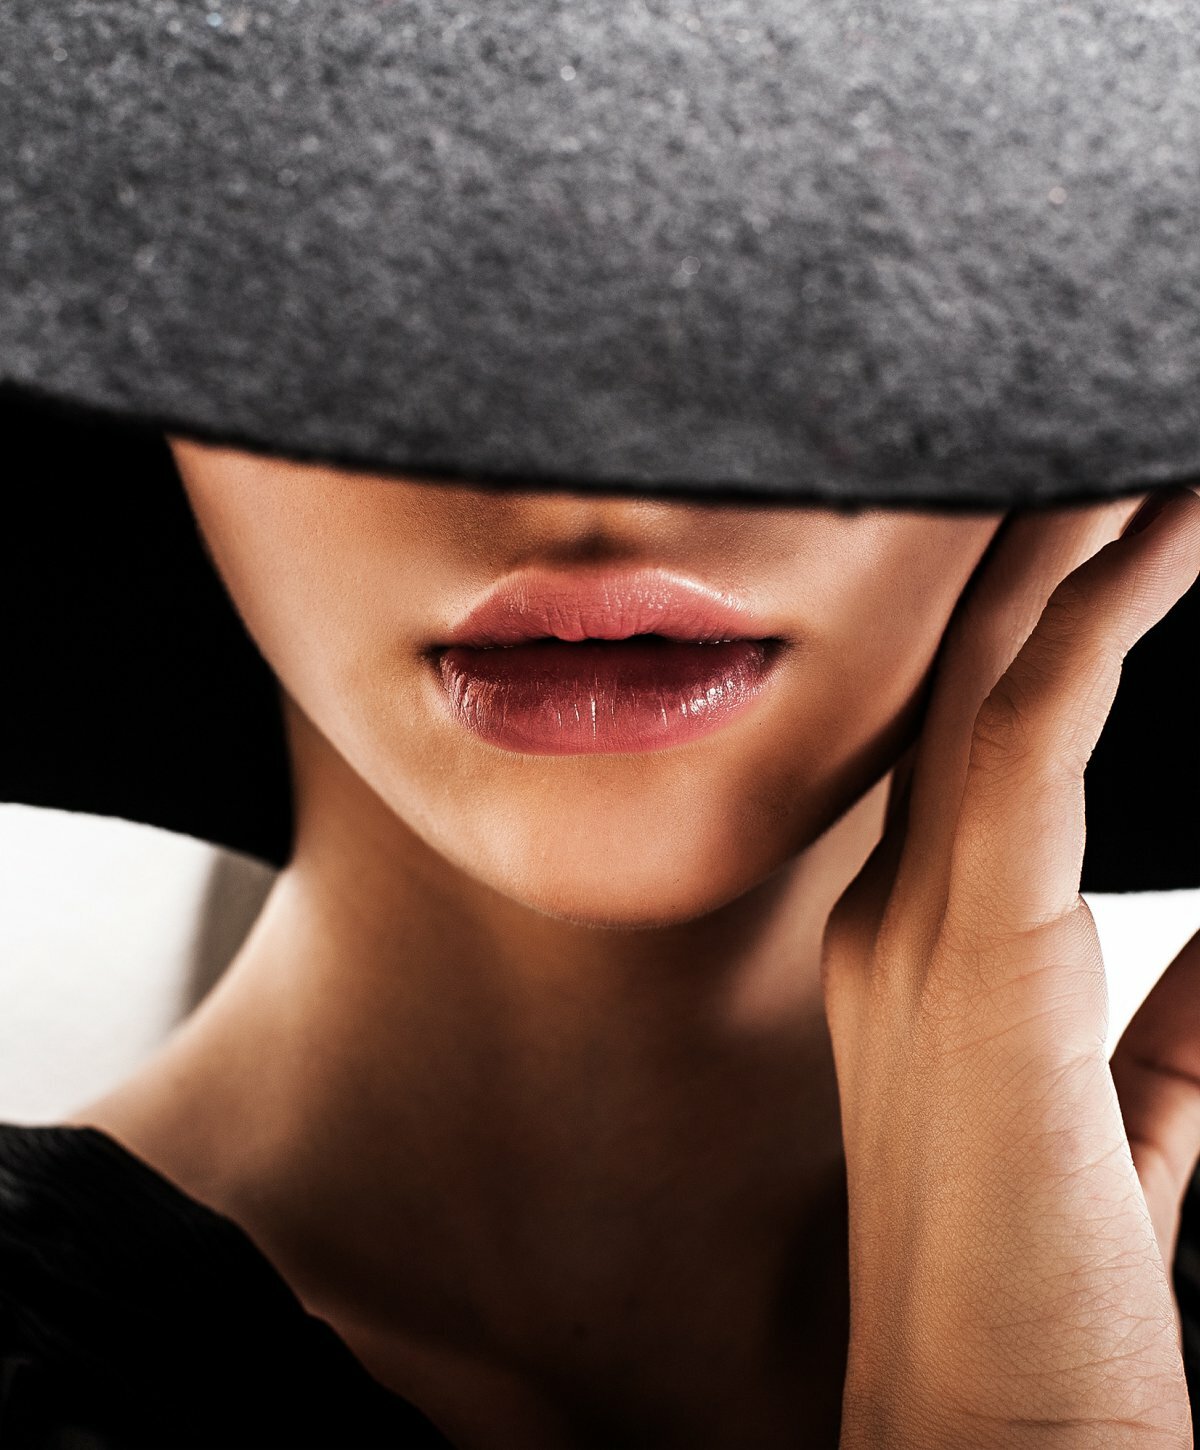 Restylane Refyne client with a black hat covering her face